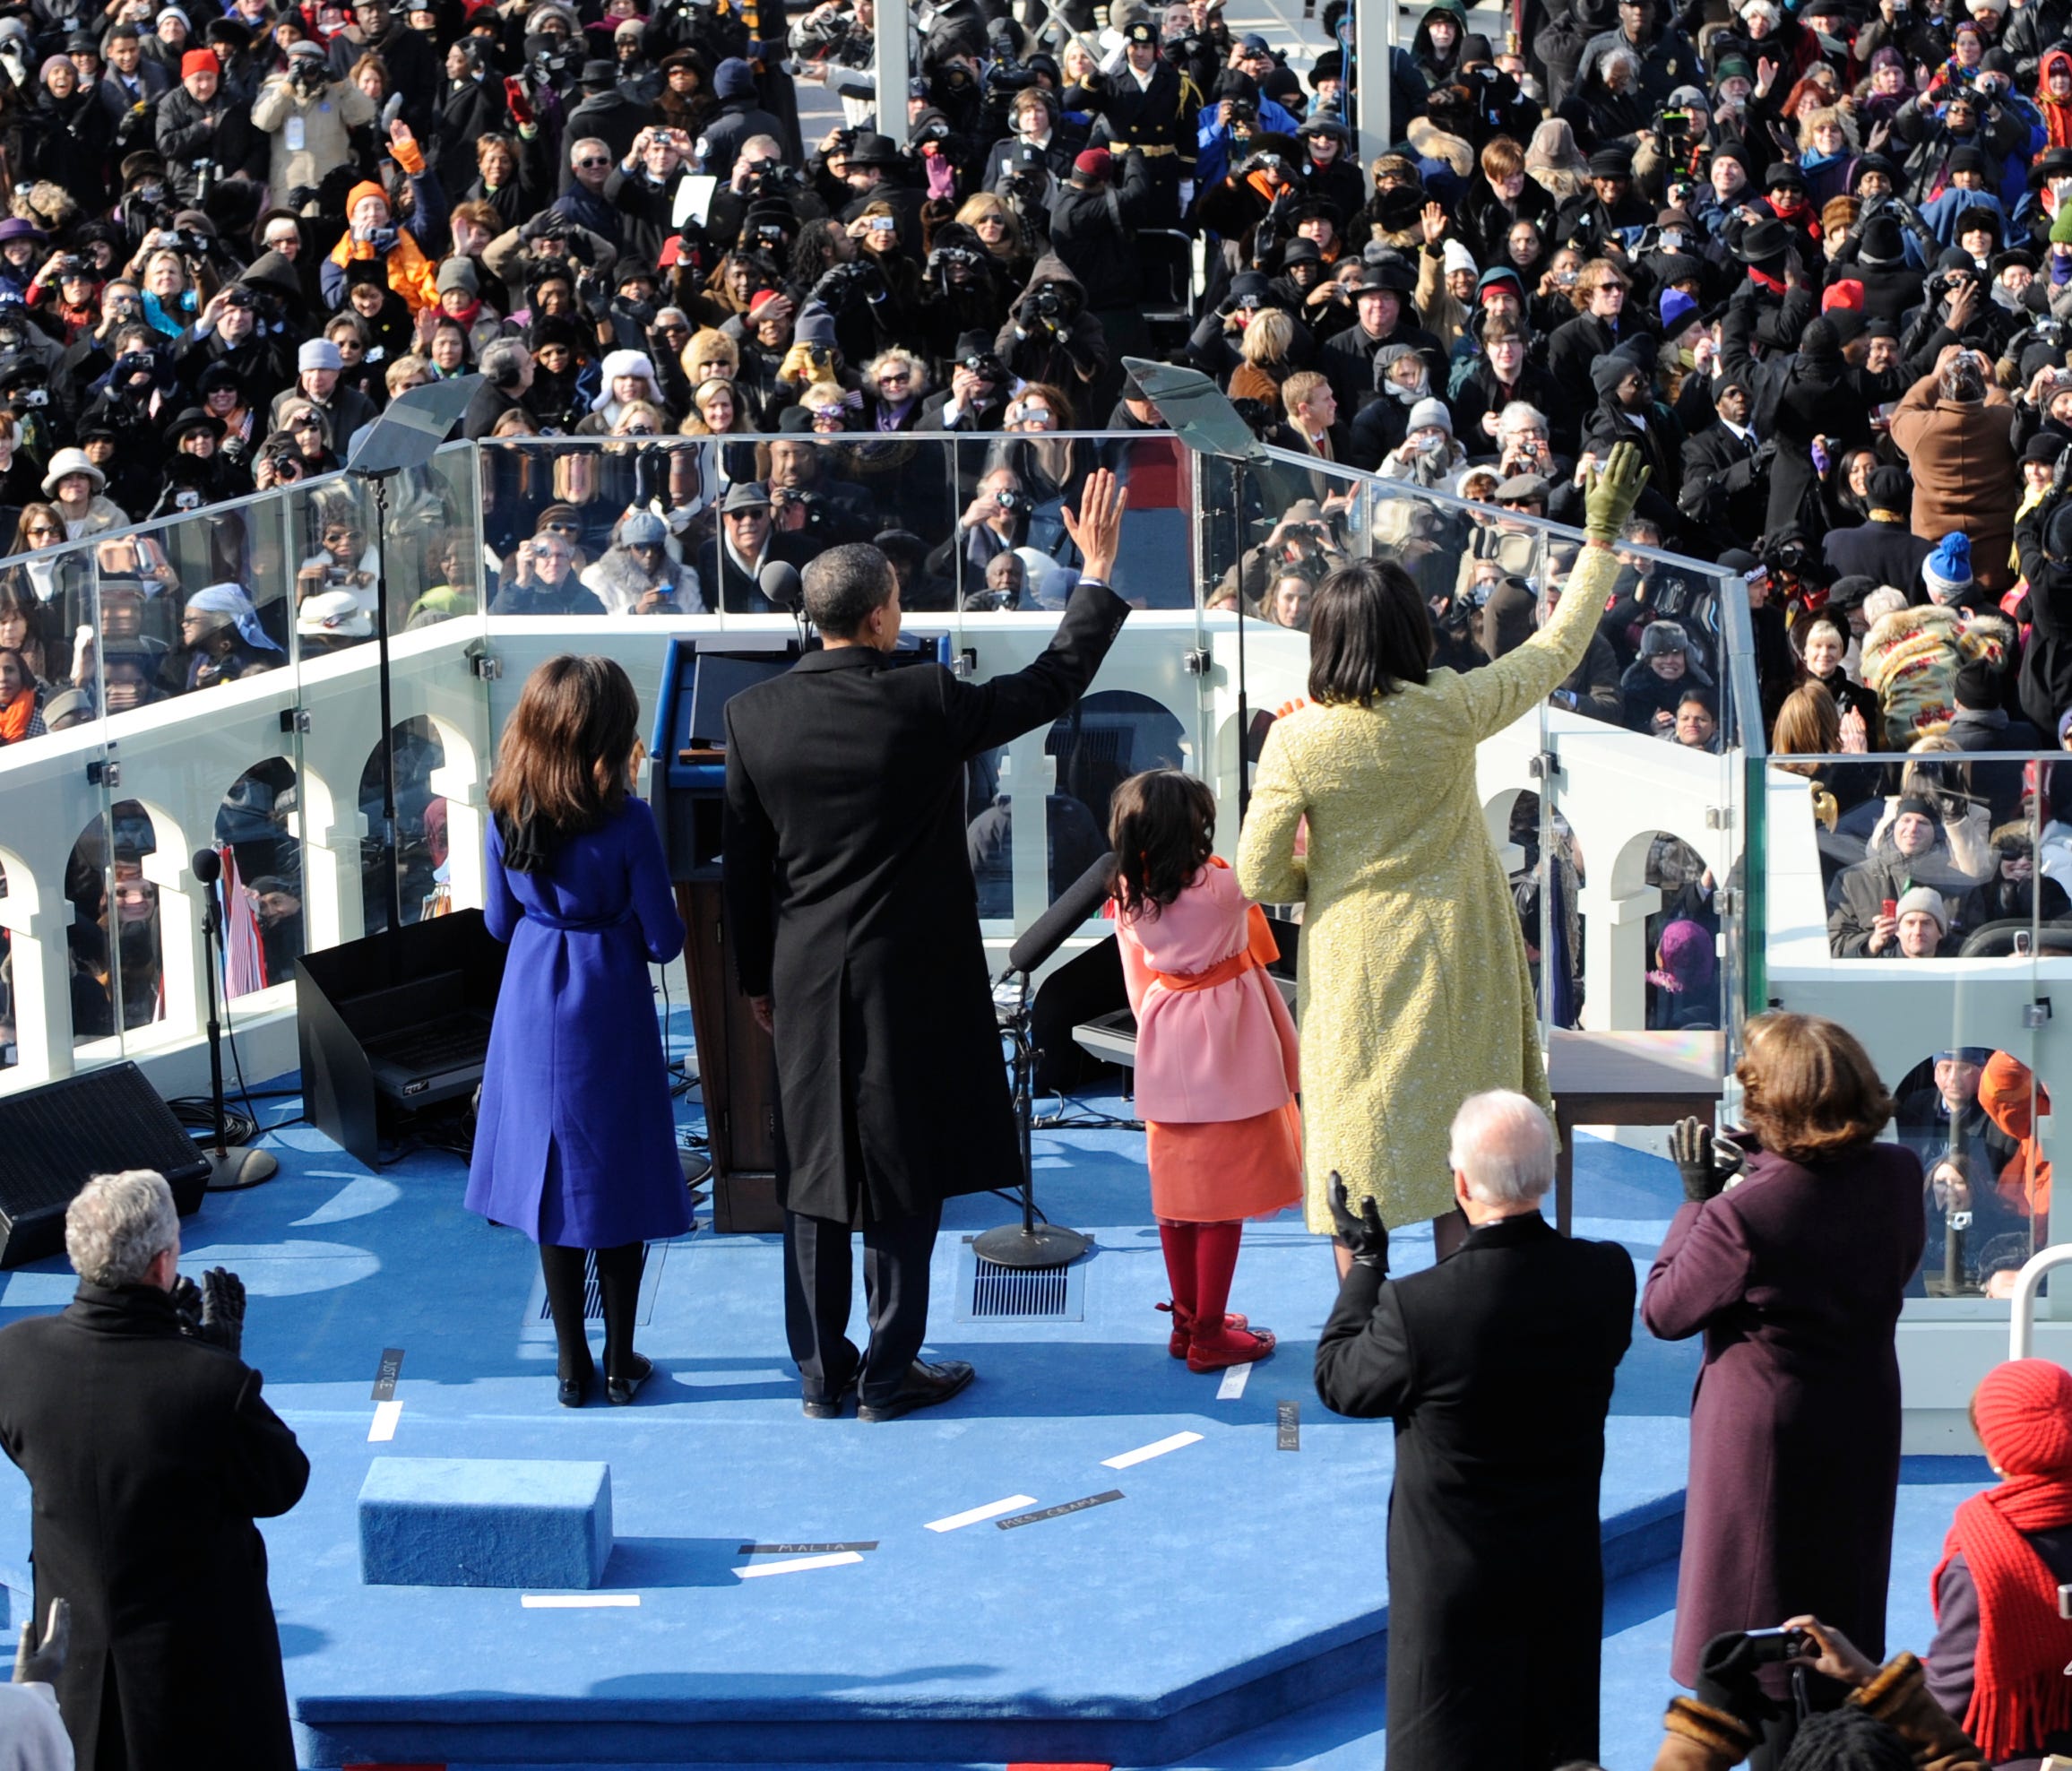 The Obama family waves to the crowd during his Jan. 20, 2009, inauguration.